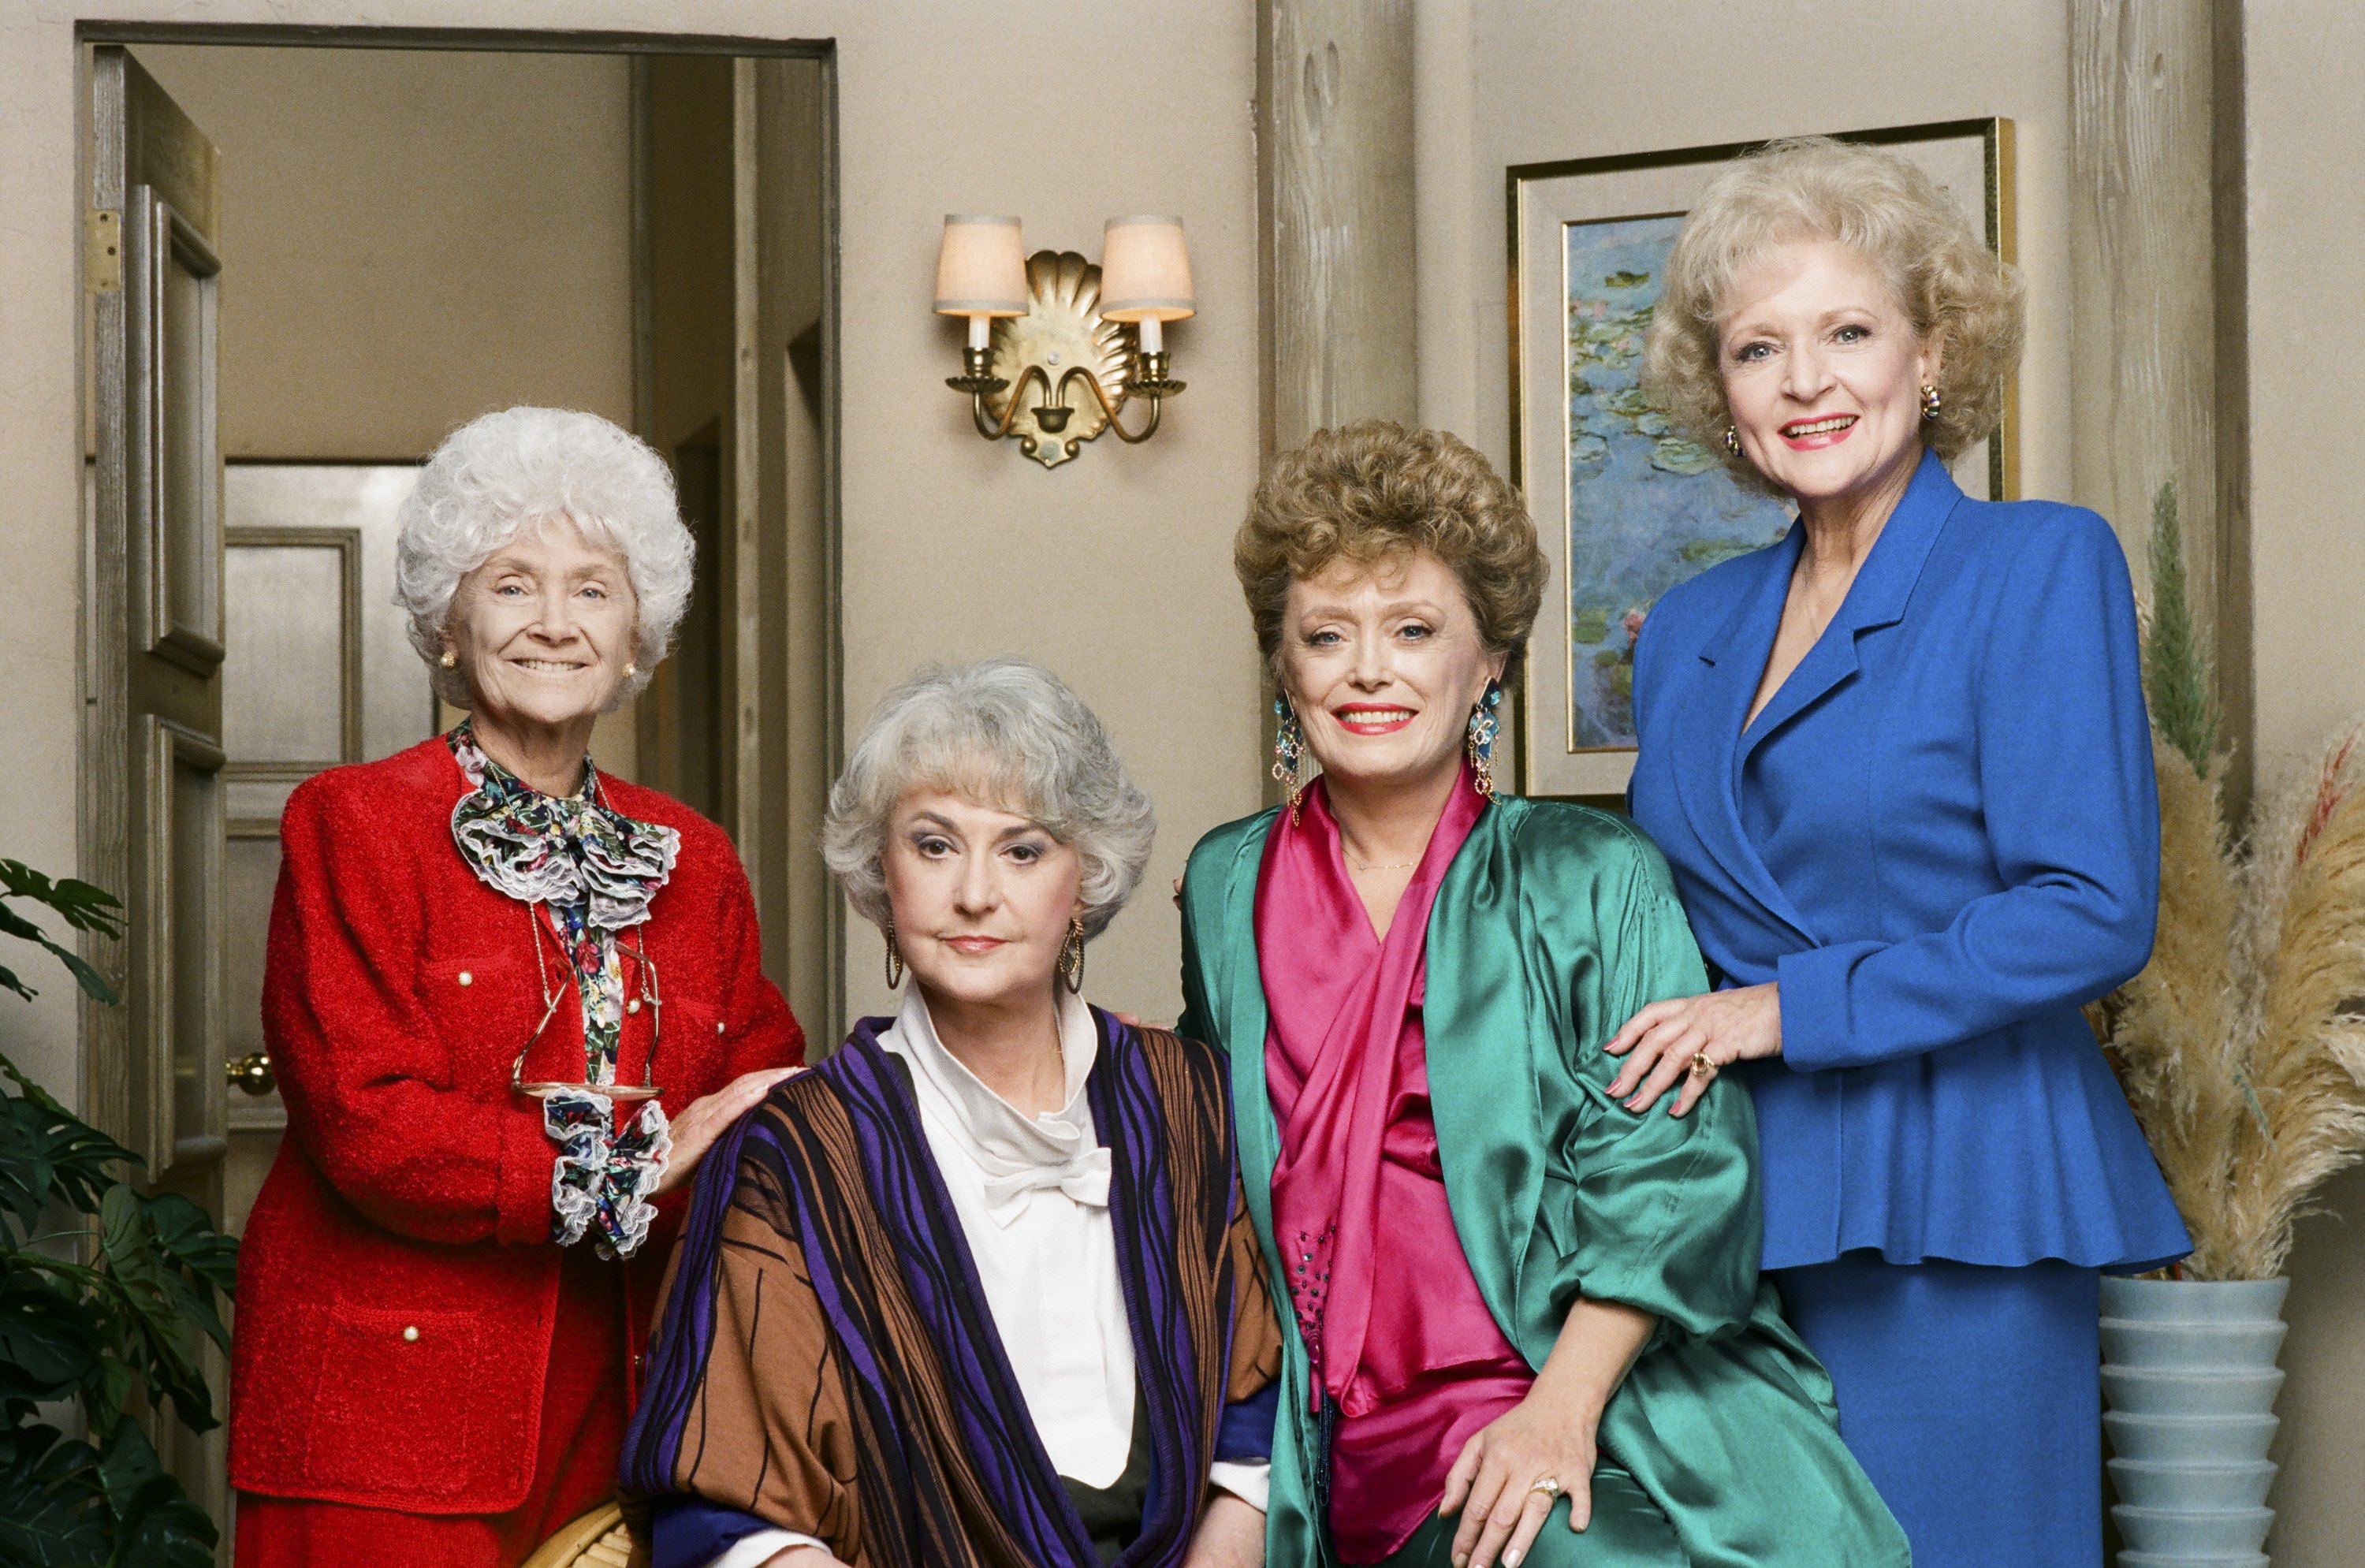 Estelle Getty as Sophia Petrillo, Bea Arthur as Dorothy Petrillo Zbornak, Rue McClanahan as Blanche Devereaux, Betty White as Rose Nylund in 'The Golden Girls'